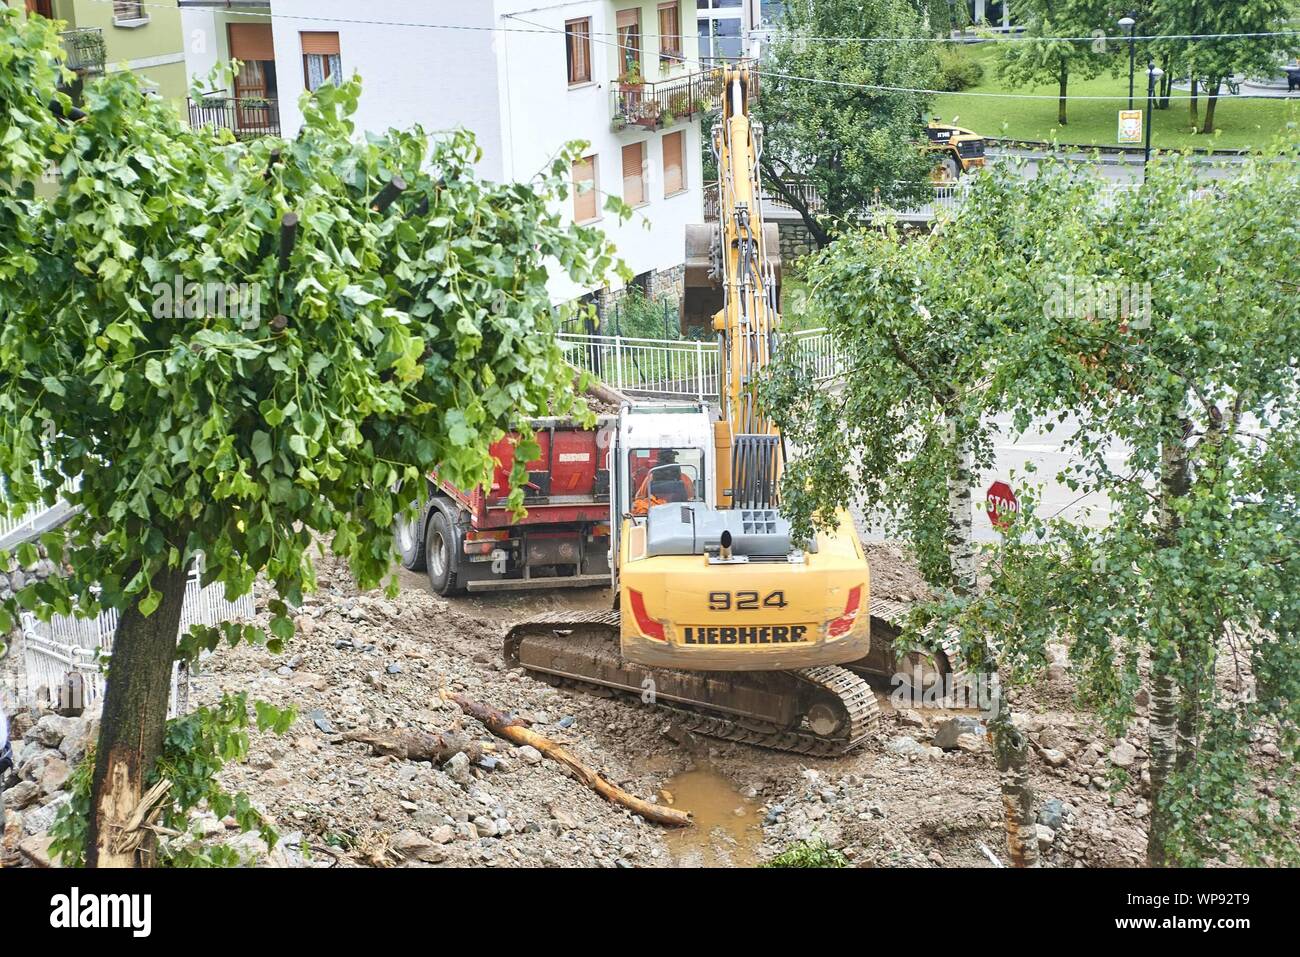 Over 200 people were evacuated from their homes in the mountain town of Casargo, Italy, after severe storms triggered landslides and flash flooding. Featuring: atmosphere Where: Casargo, Lombardy, Italy When: 07 Aug 2019 Credit: IPA/WENN.com  **Only available for publication in UK, USA, Germany, Austria, Switzerland** Stock Photo